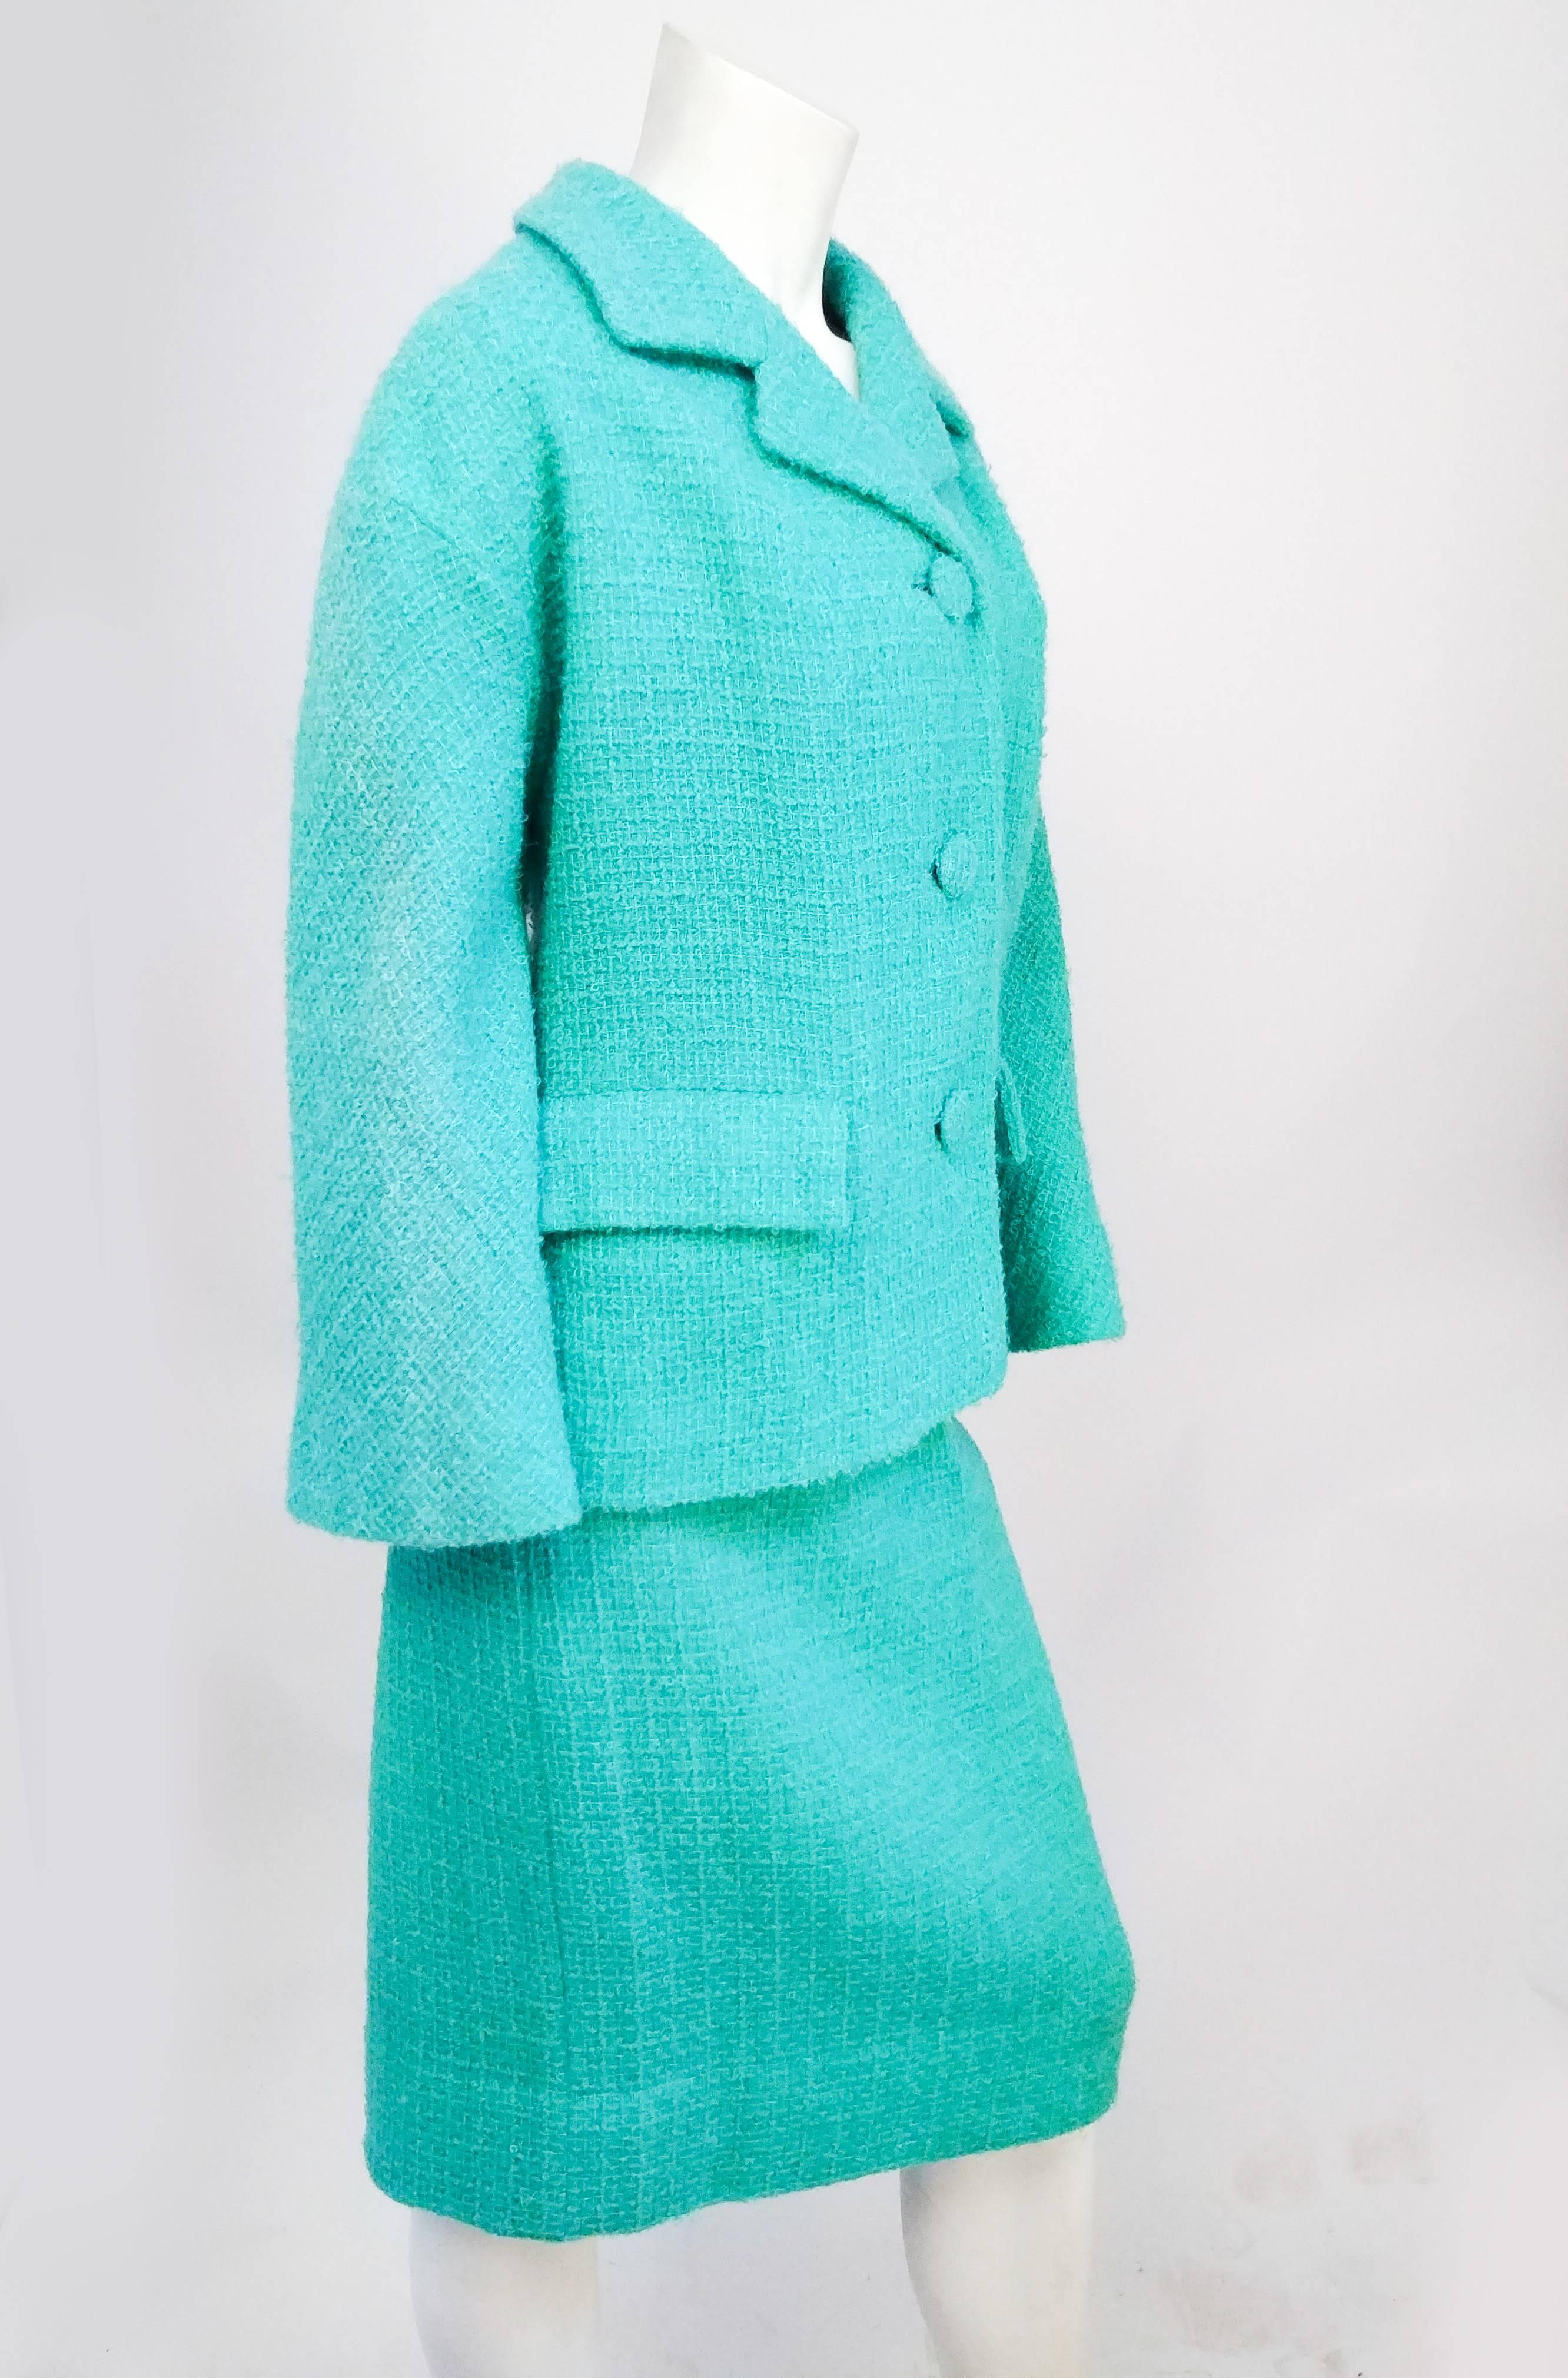 1960s Lilli Ann Aqua Wool Two Piece Skirt Suit. Wool bocle suit set with boxy 1960s silhouette notched lapel jacket, two front pockets, and matching covered button closure. 